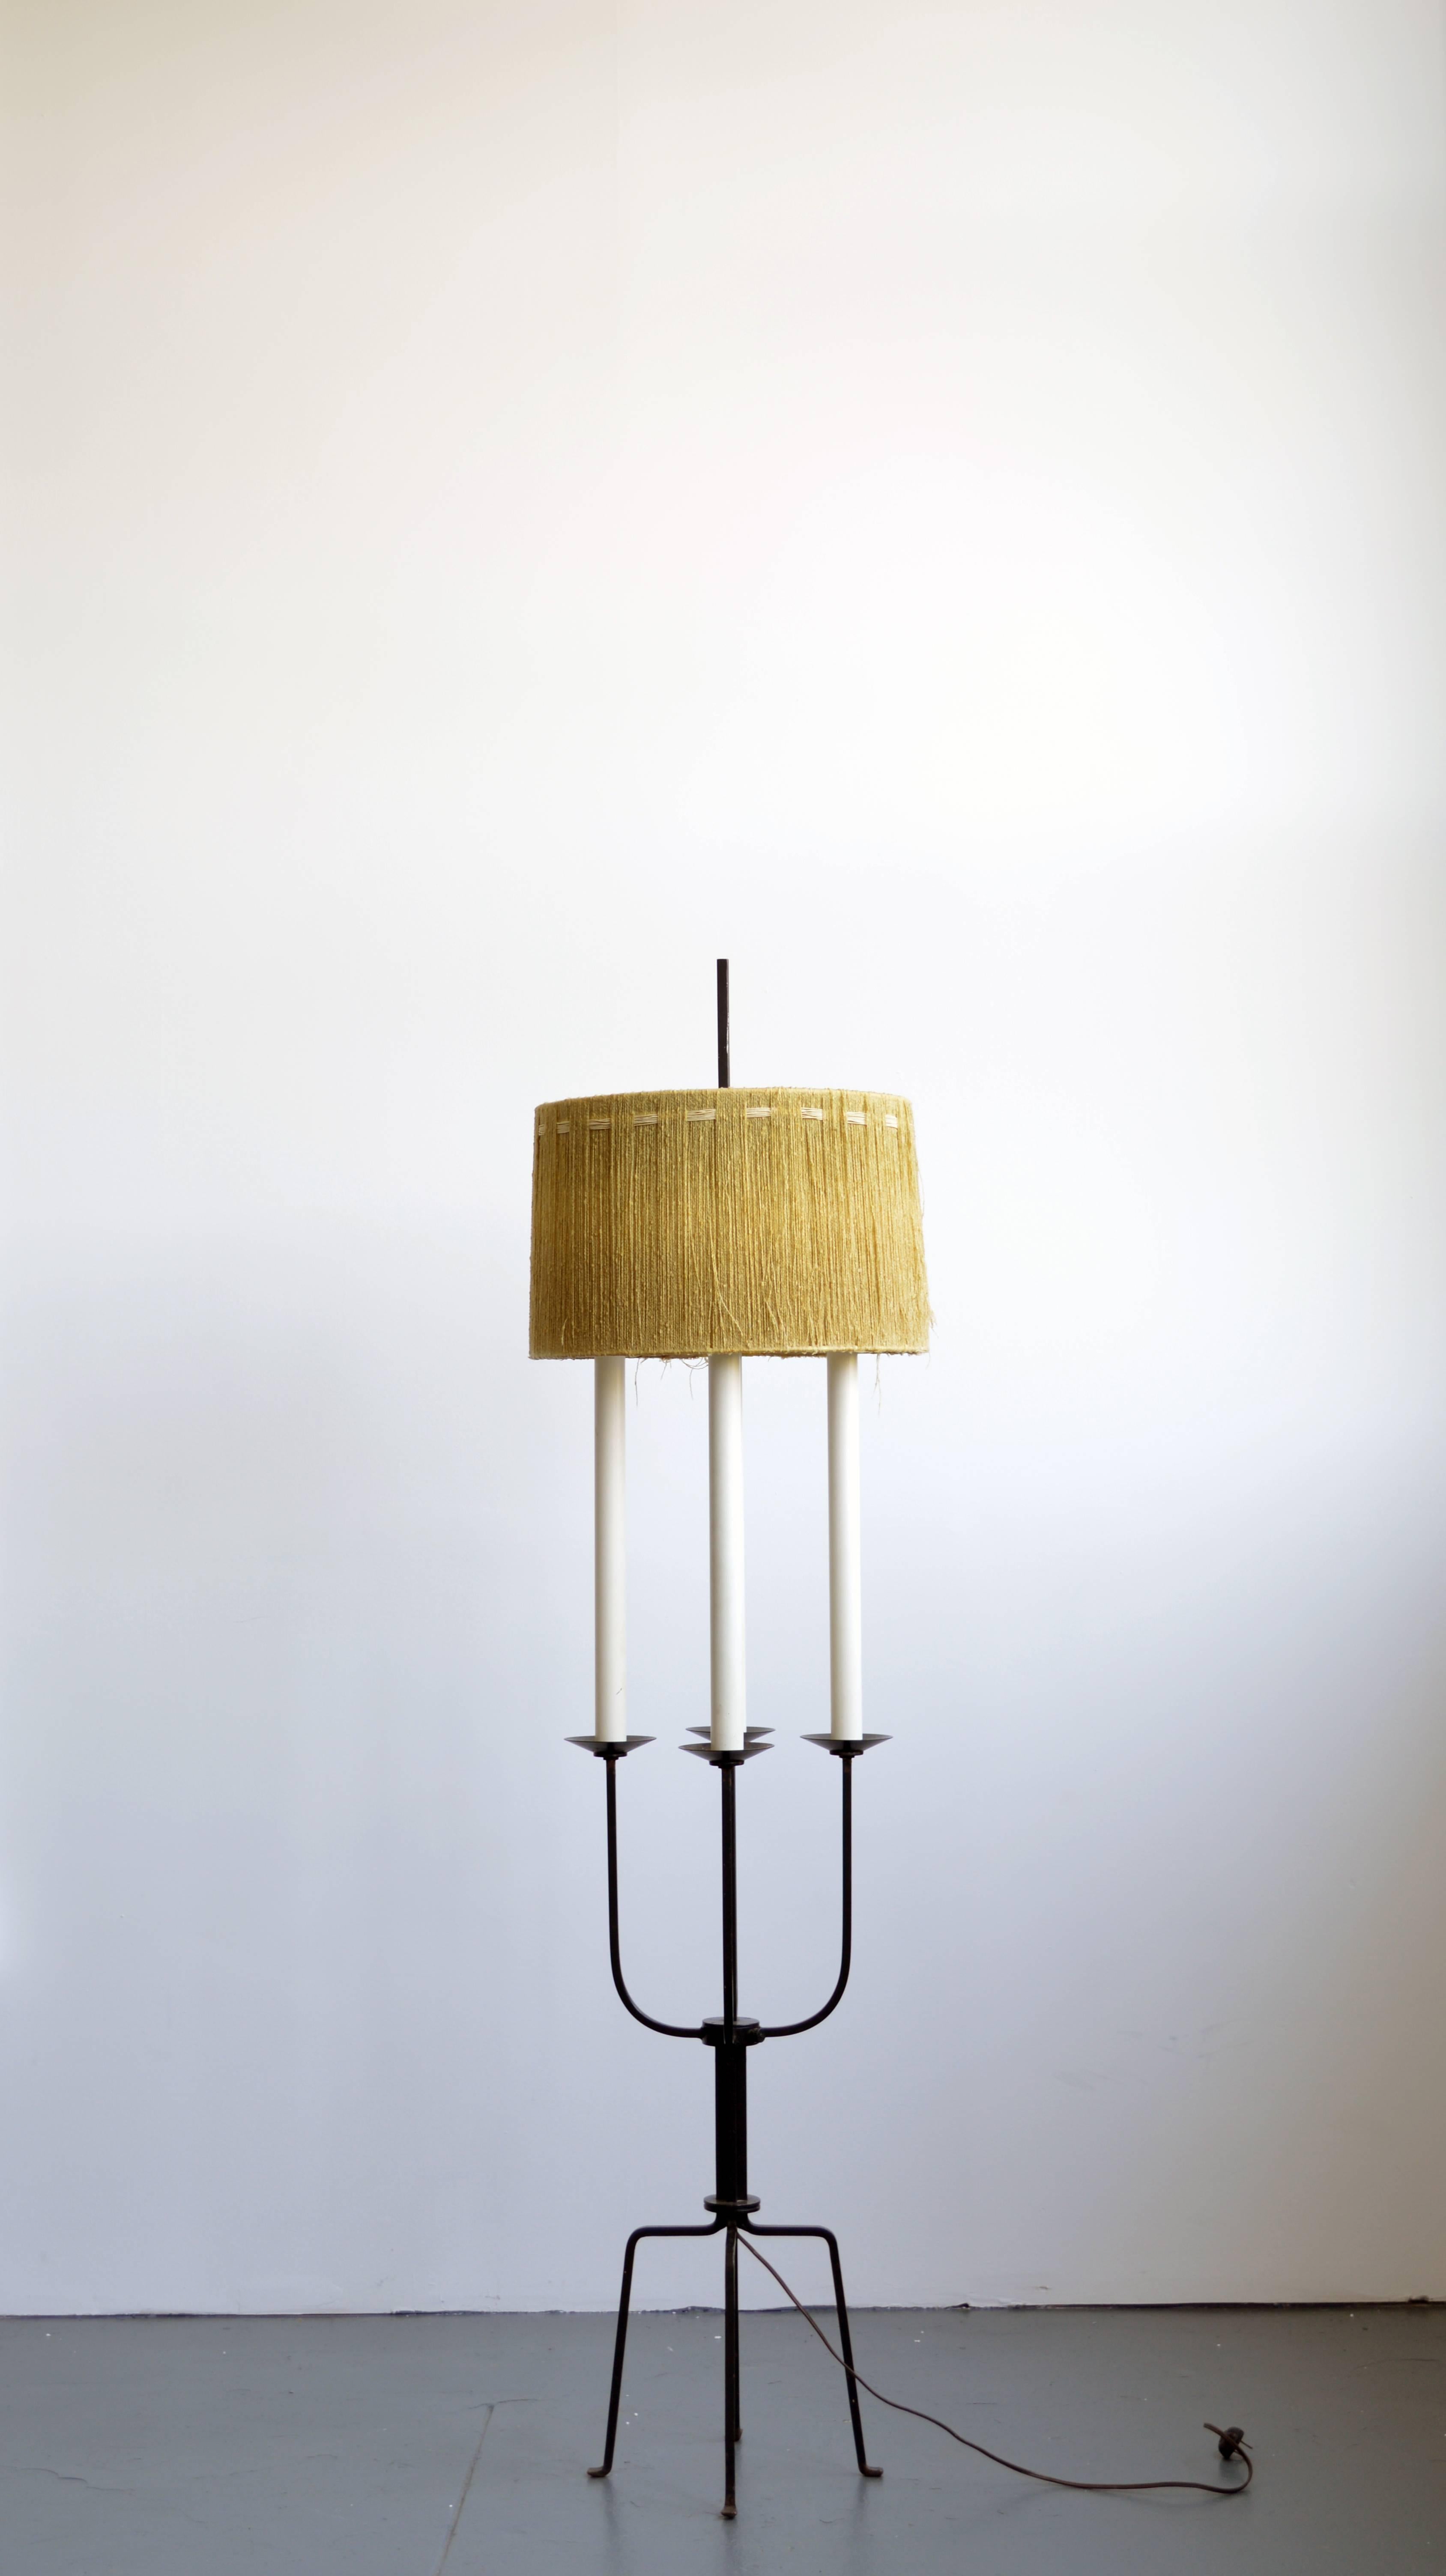 Wrought iron floor lamp designed by Tommi Parzinger. The wool shade is a rare original.

Offered by Neal Beckstedt